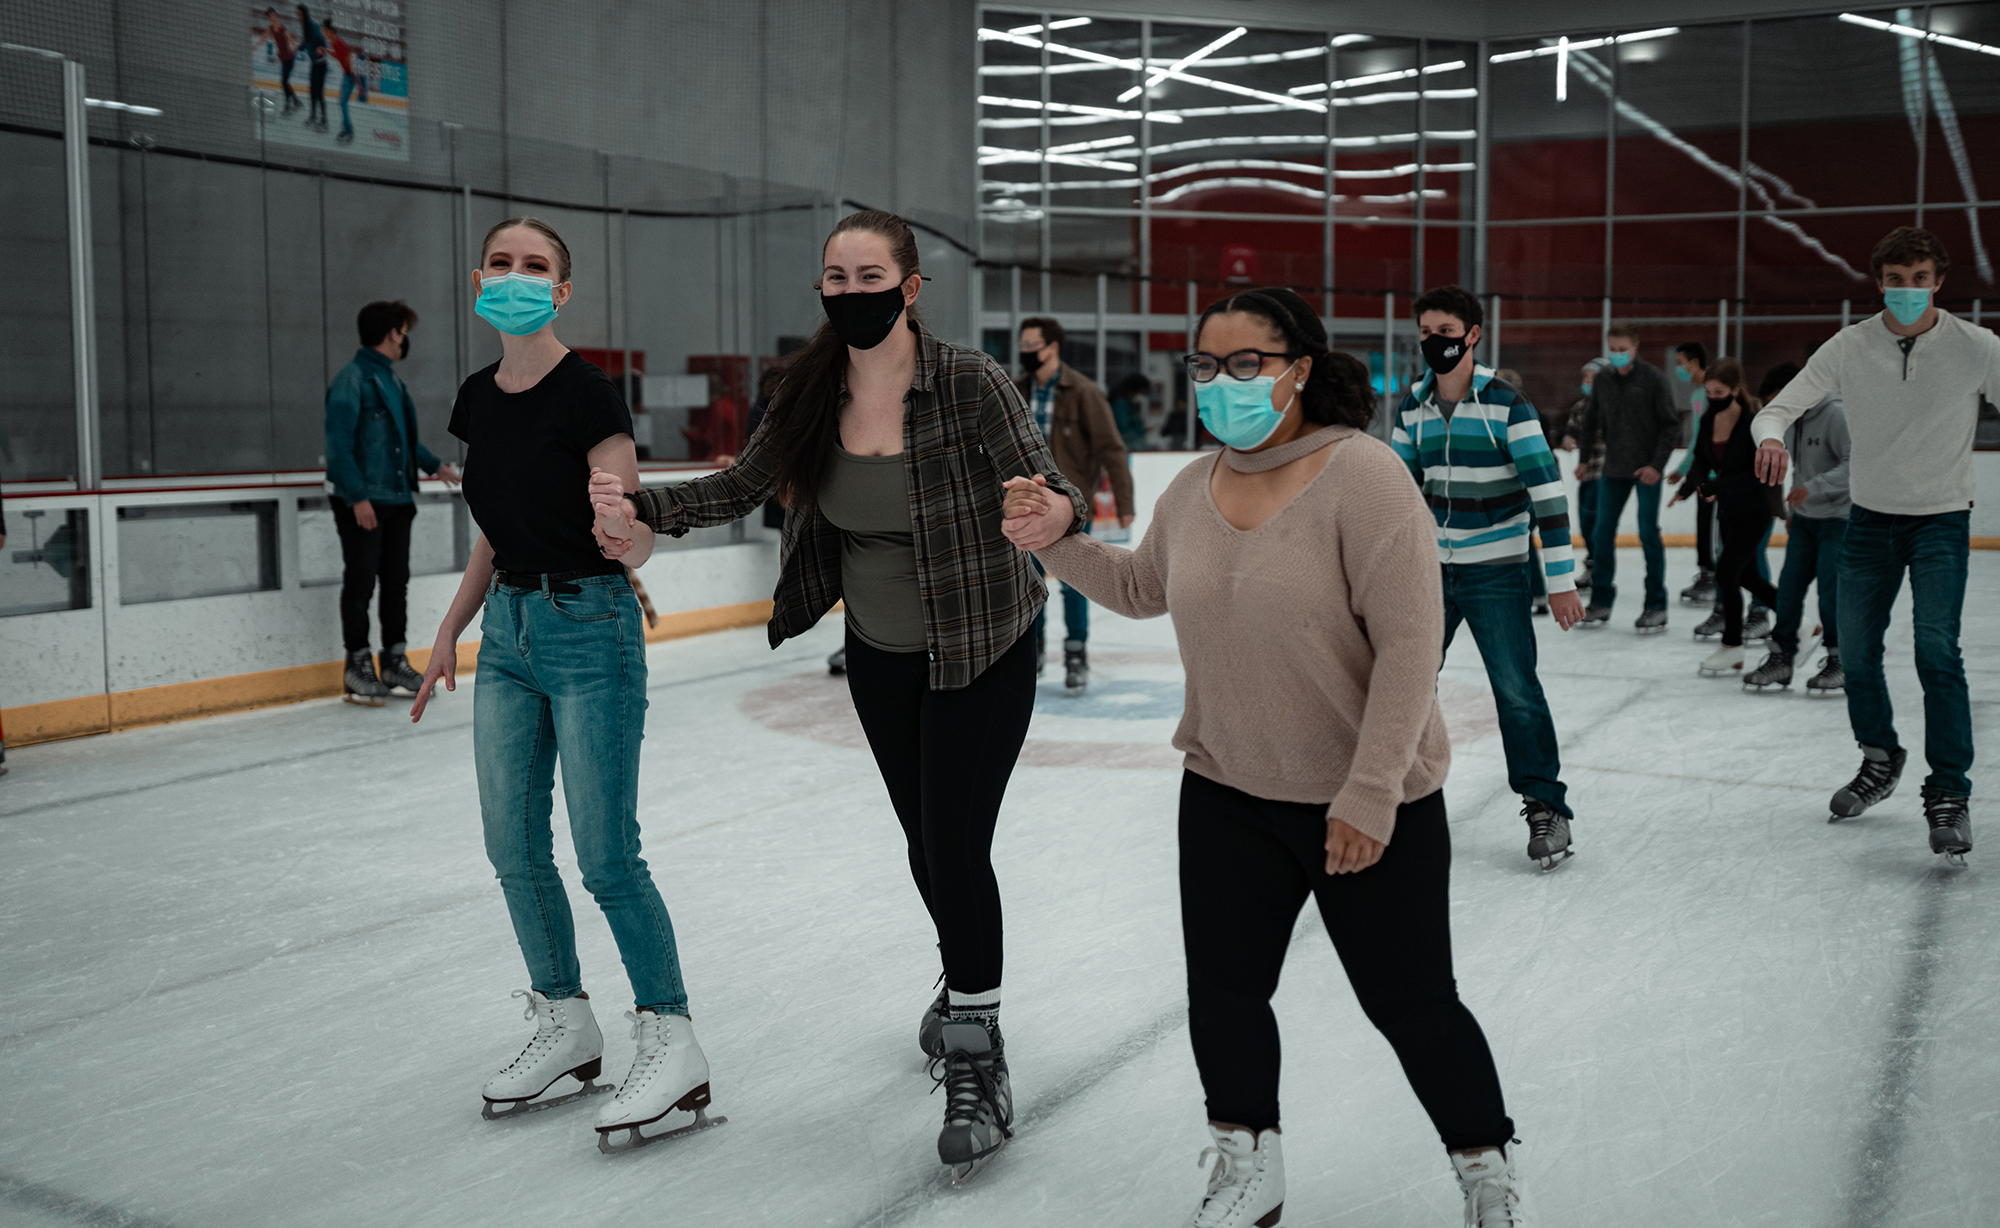 Free Skate Night for Husker students at the Breslow Ice Center will happen on Nov 5, 2021. [Mike Jackson | Student Affairs]